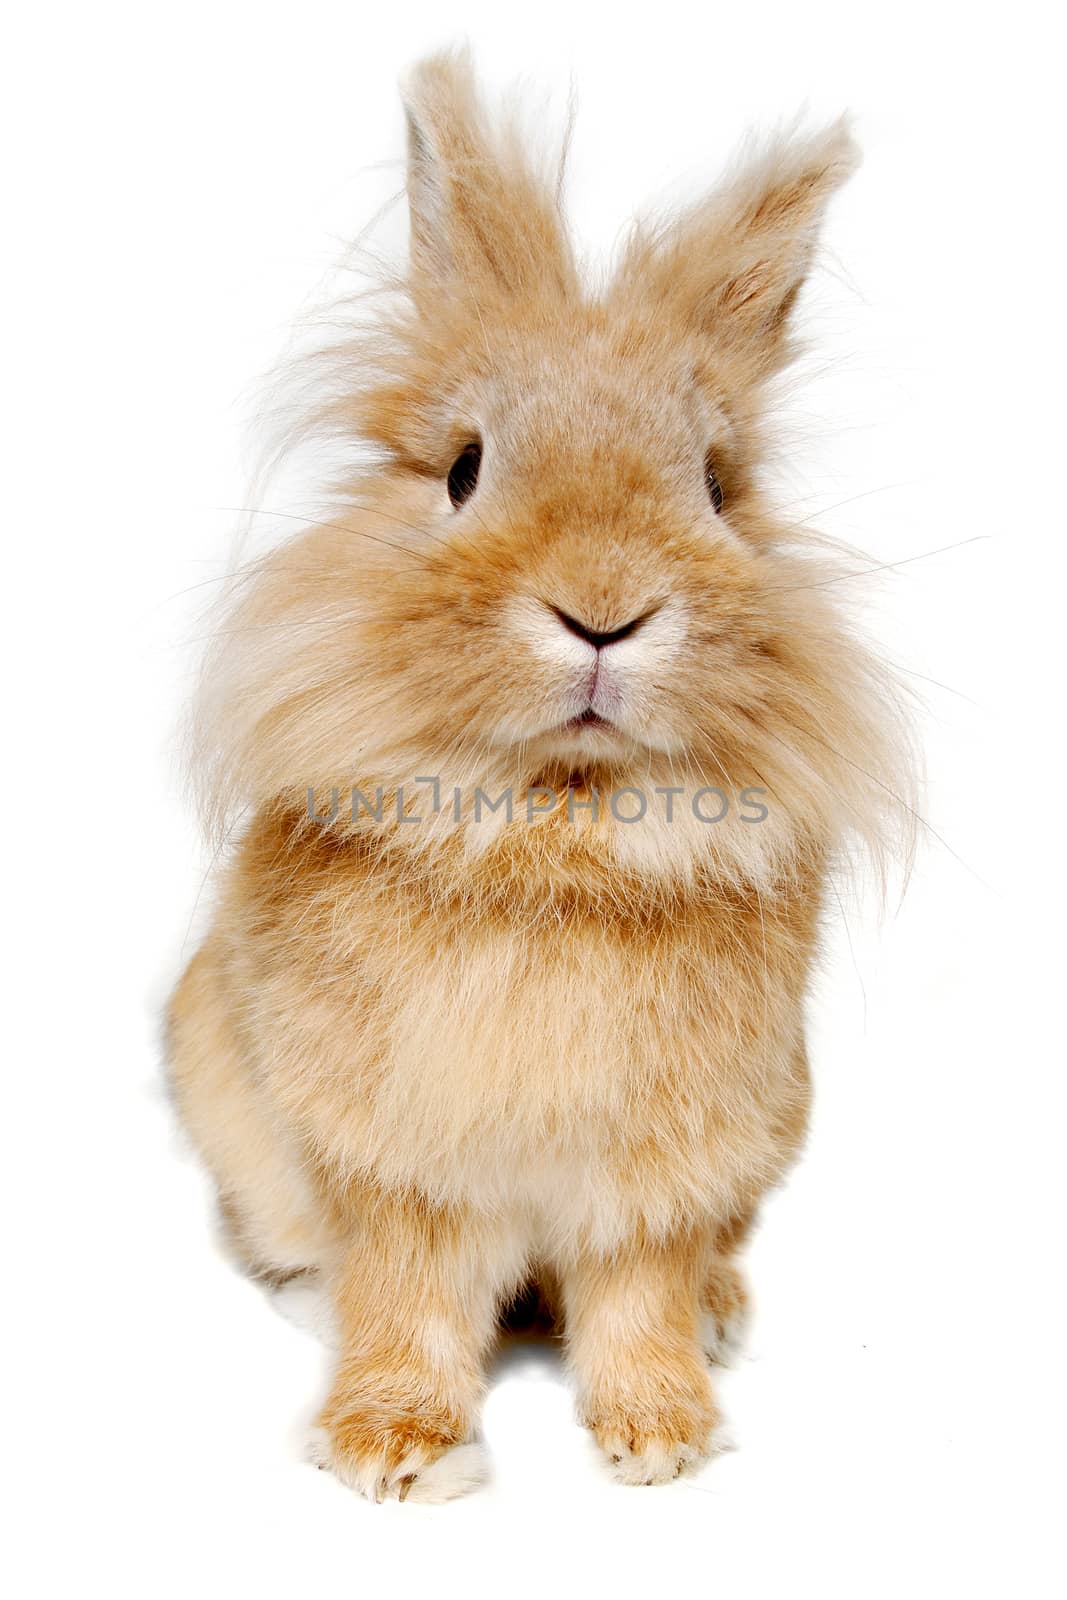 Rabbit isolated on white background by cfoto